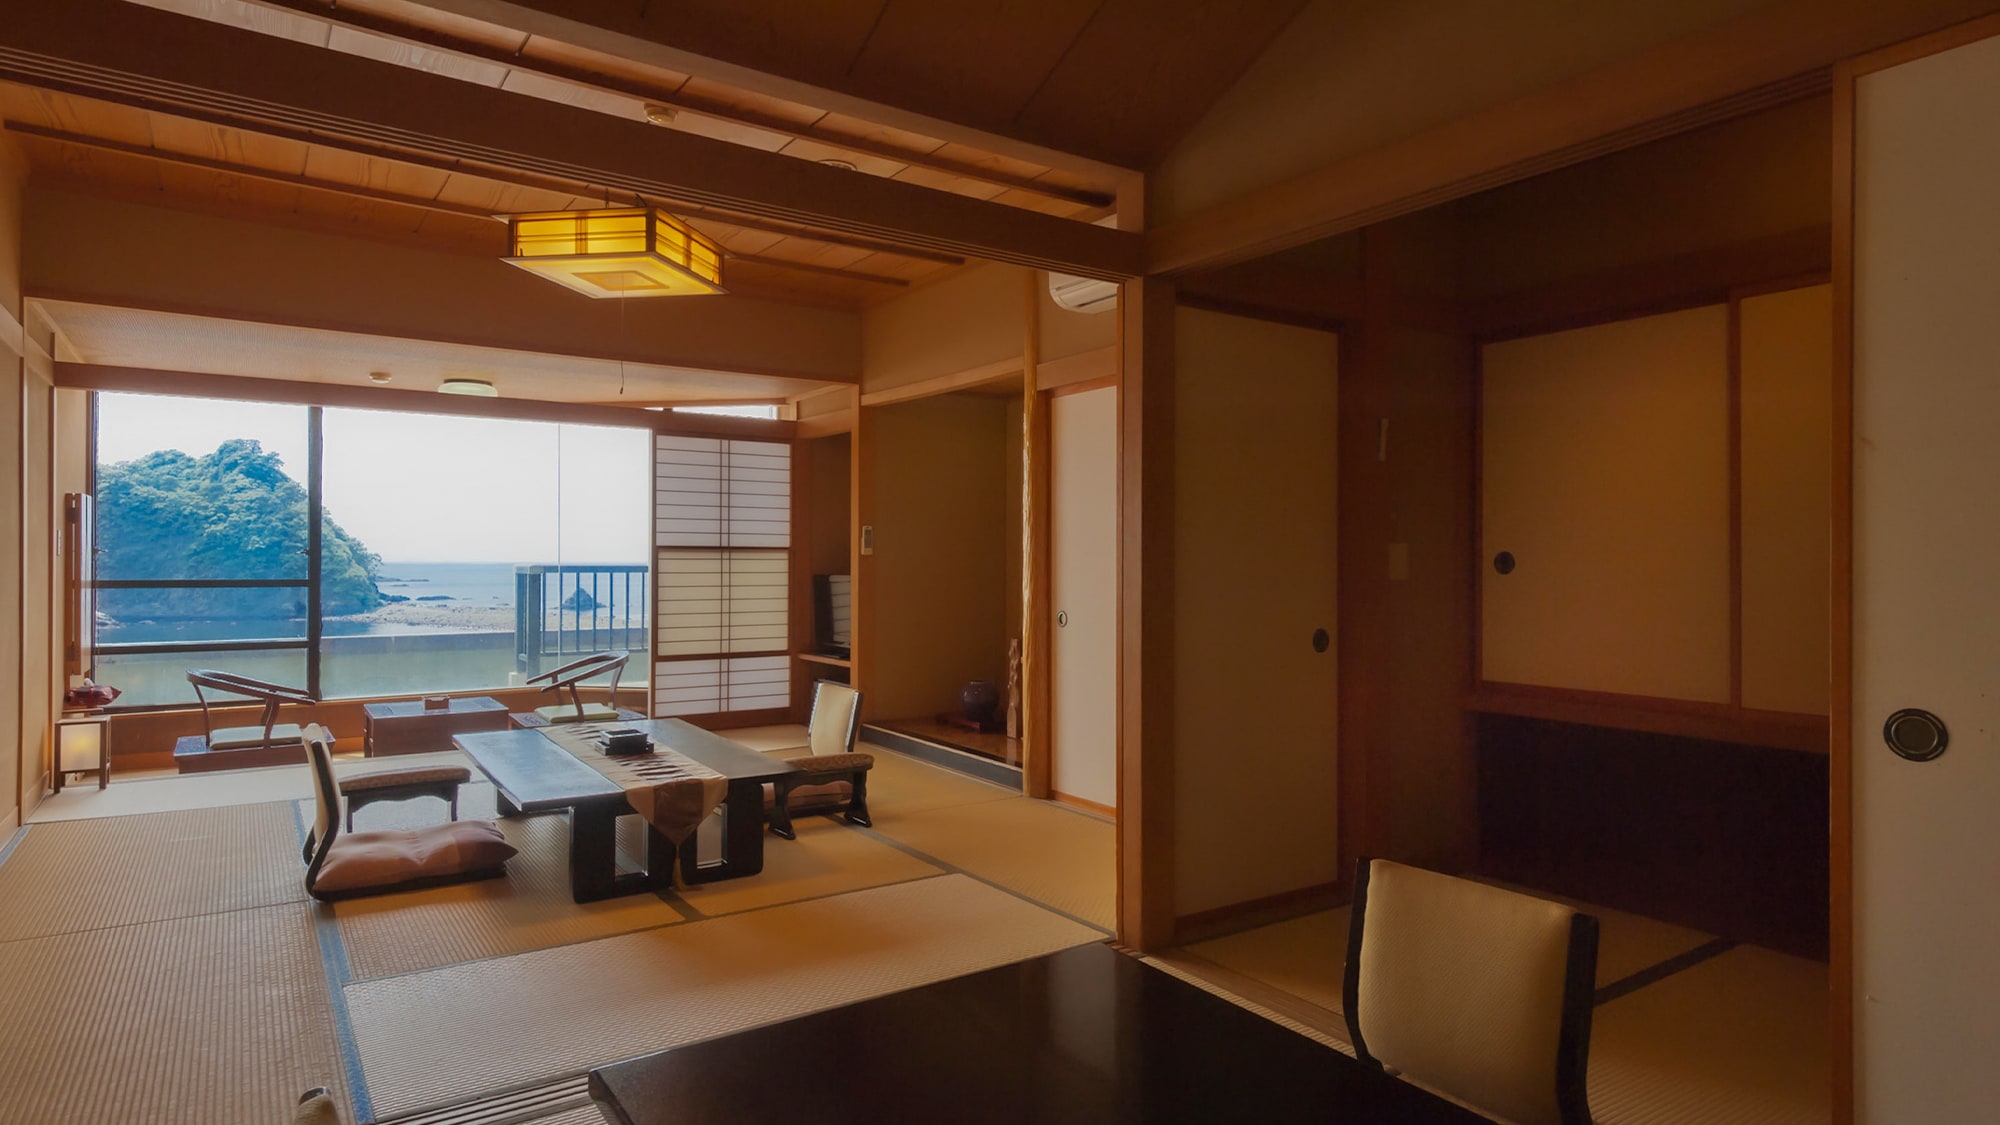 ■Deluxe Japanese-style room 10 tatami mats + 4.5 tatami mats｜Relax in a spacious space. Be healed by the sea view from your room